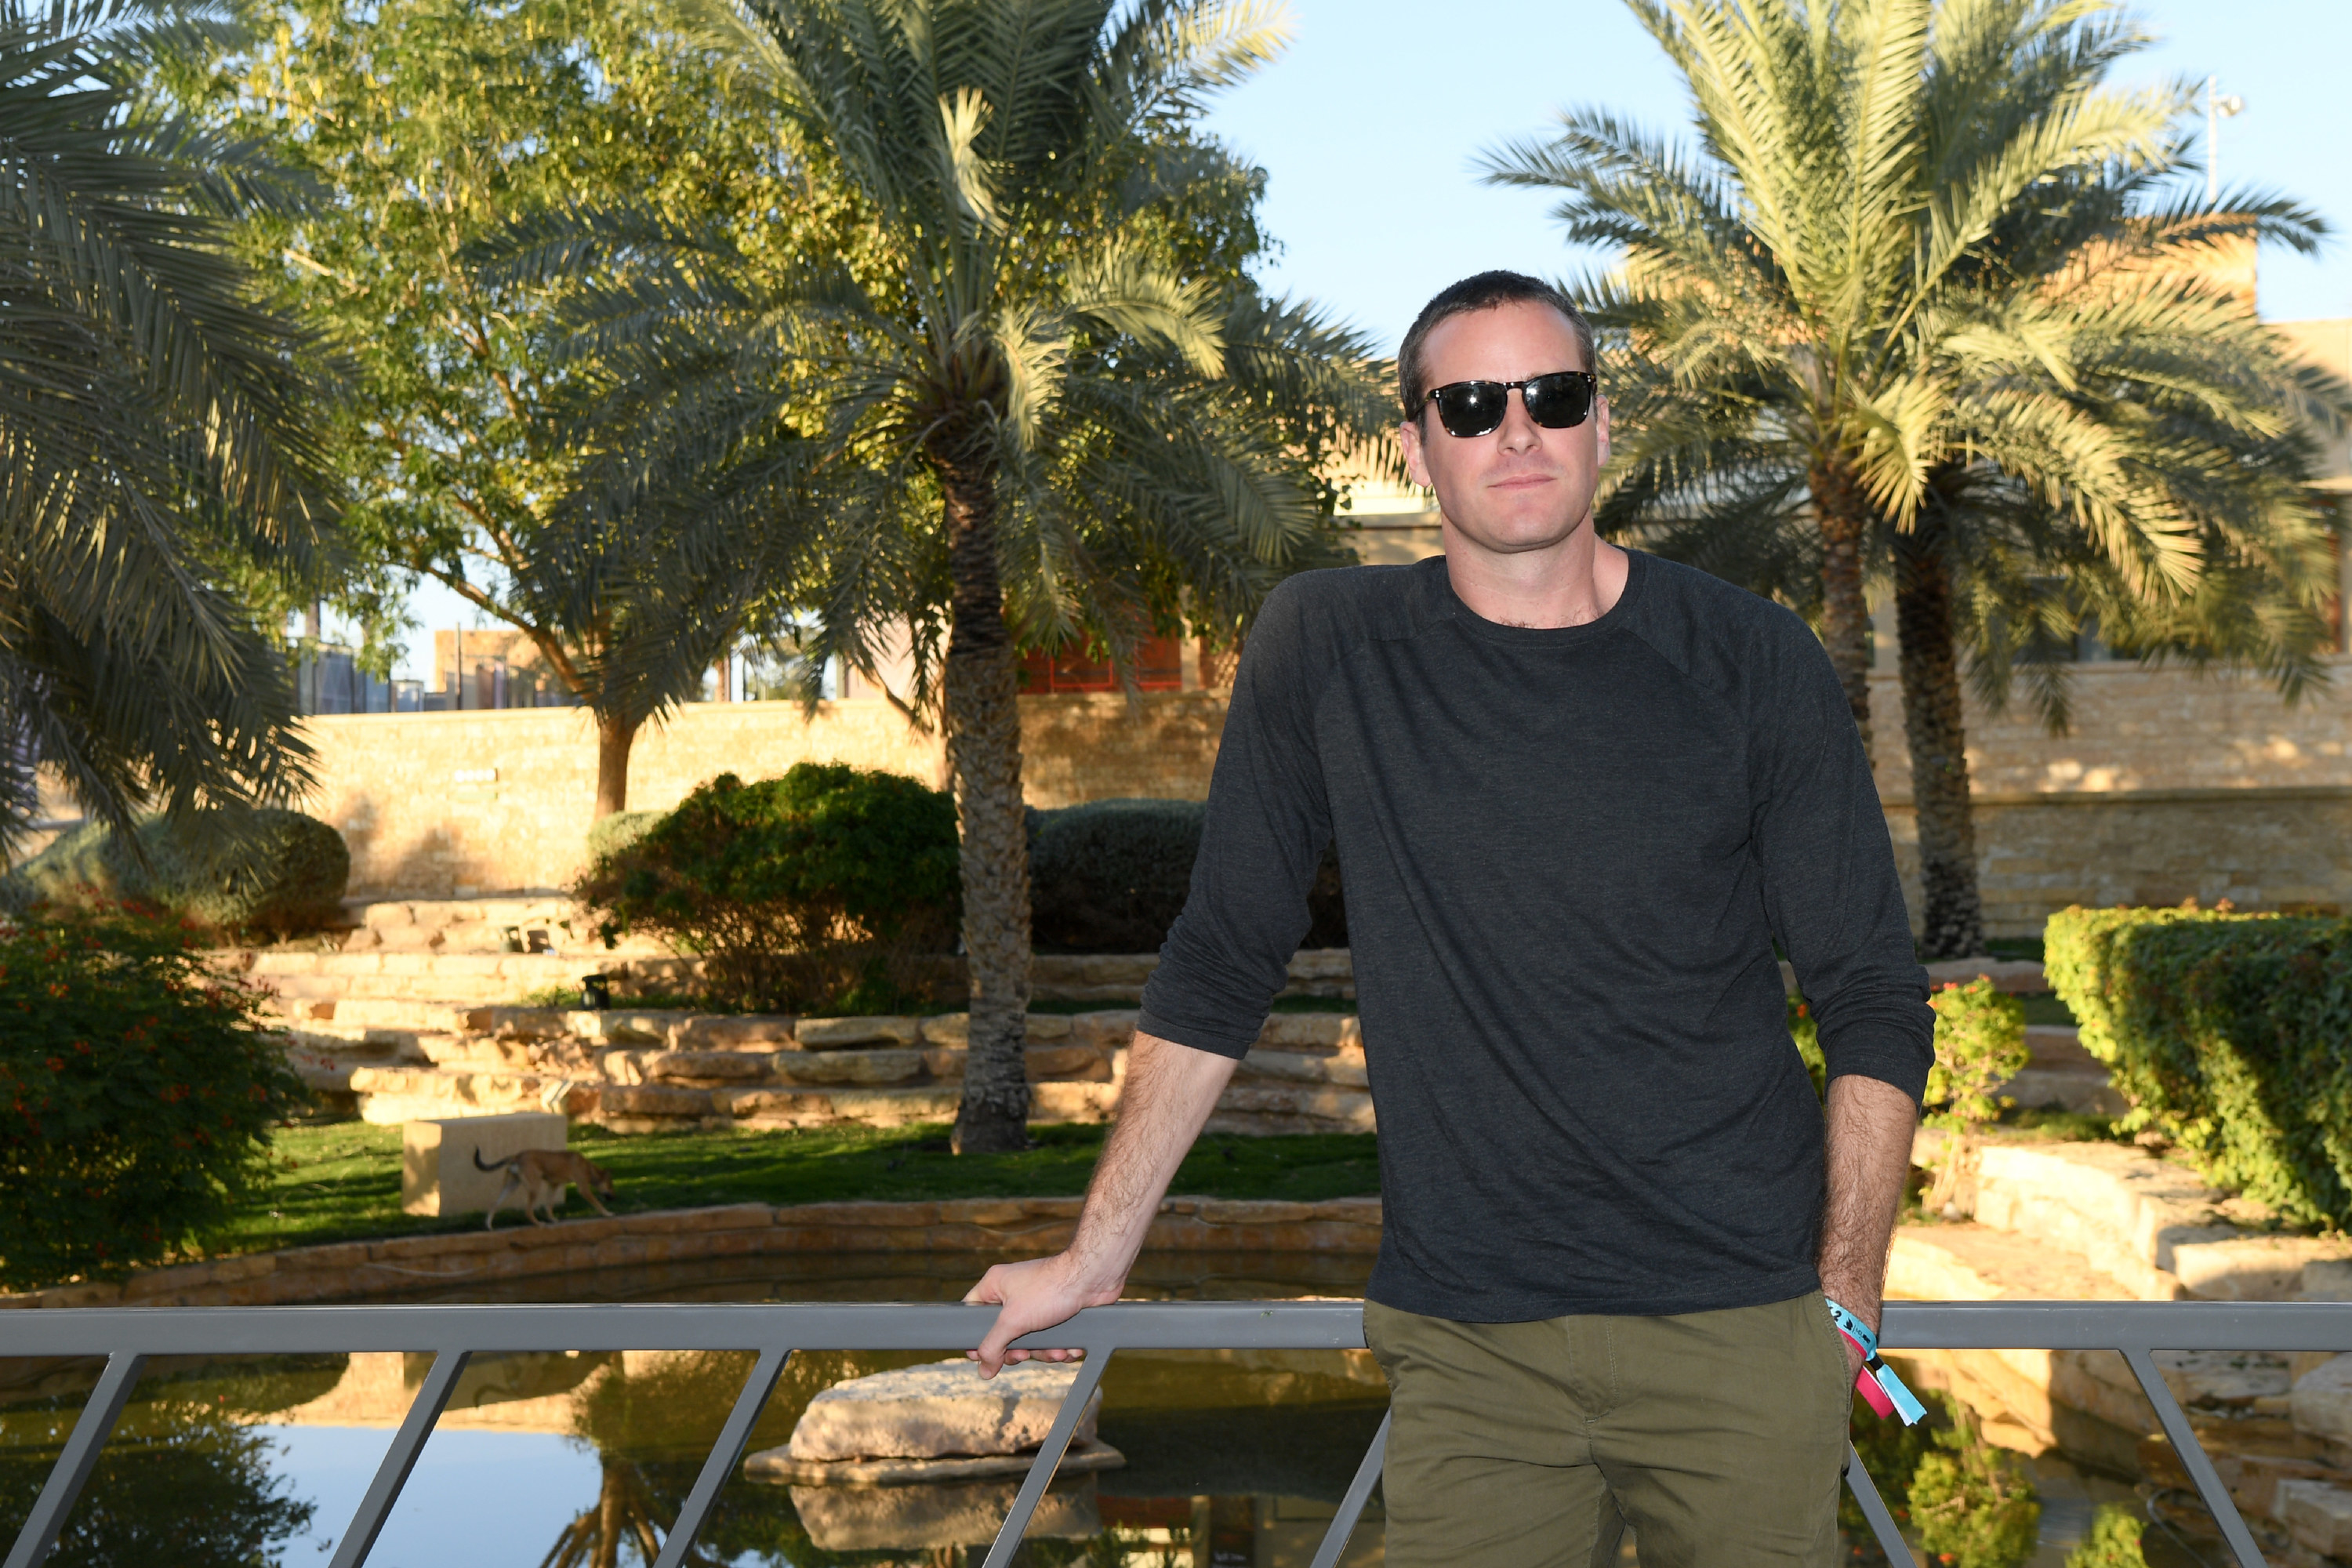 Armie Hammer attends the MDL Beast Festival Lunch at the historical city of Diriyah on December 21, 2019 in Riyadh, Saudi Arabia